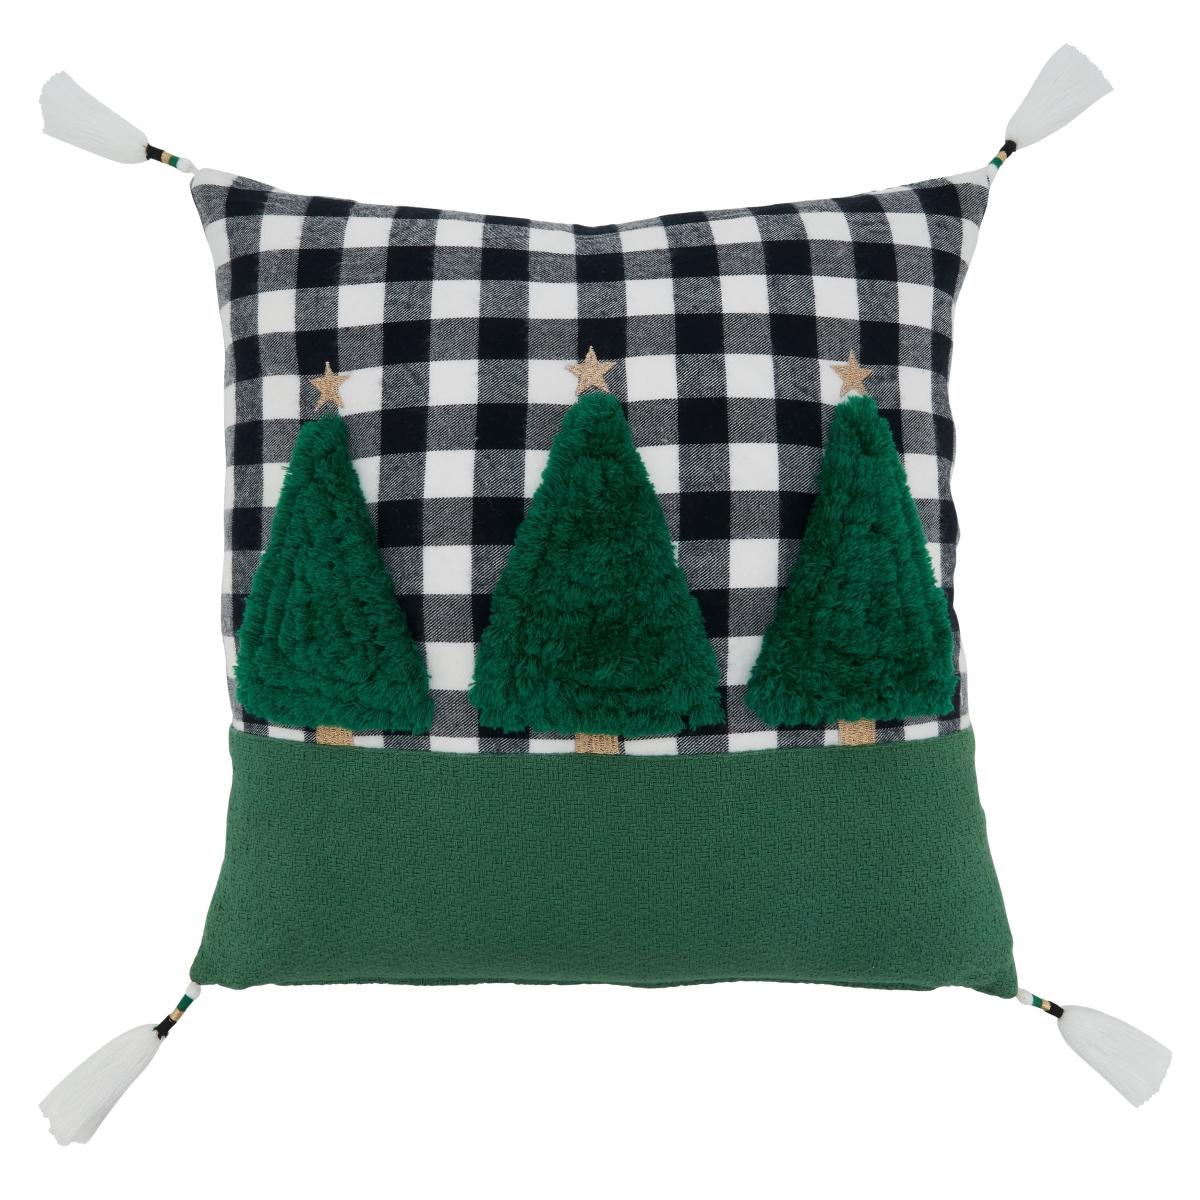 Picture of SARO 1330.G18SP 18 in. Square Green Plaid Poly-Filled Throw Pillow with Trees Design